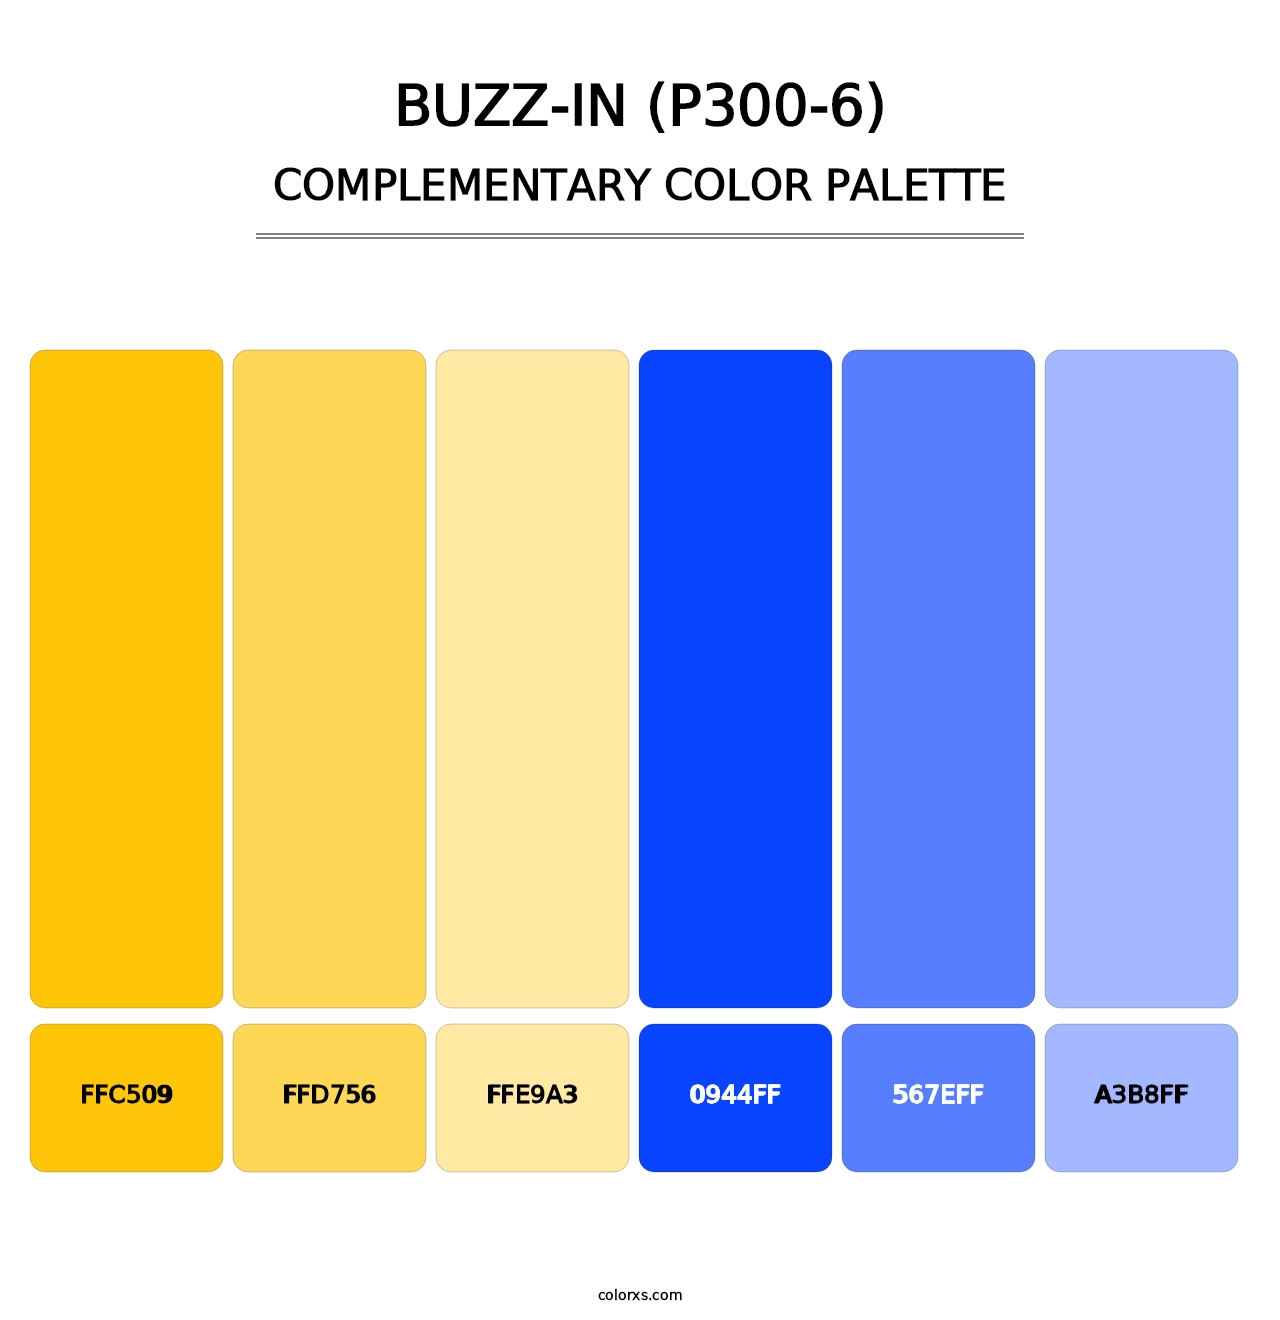 Buzz-In (P300-6) - Complementary Color Palette